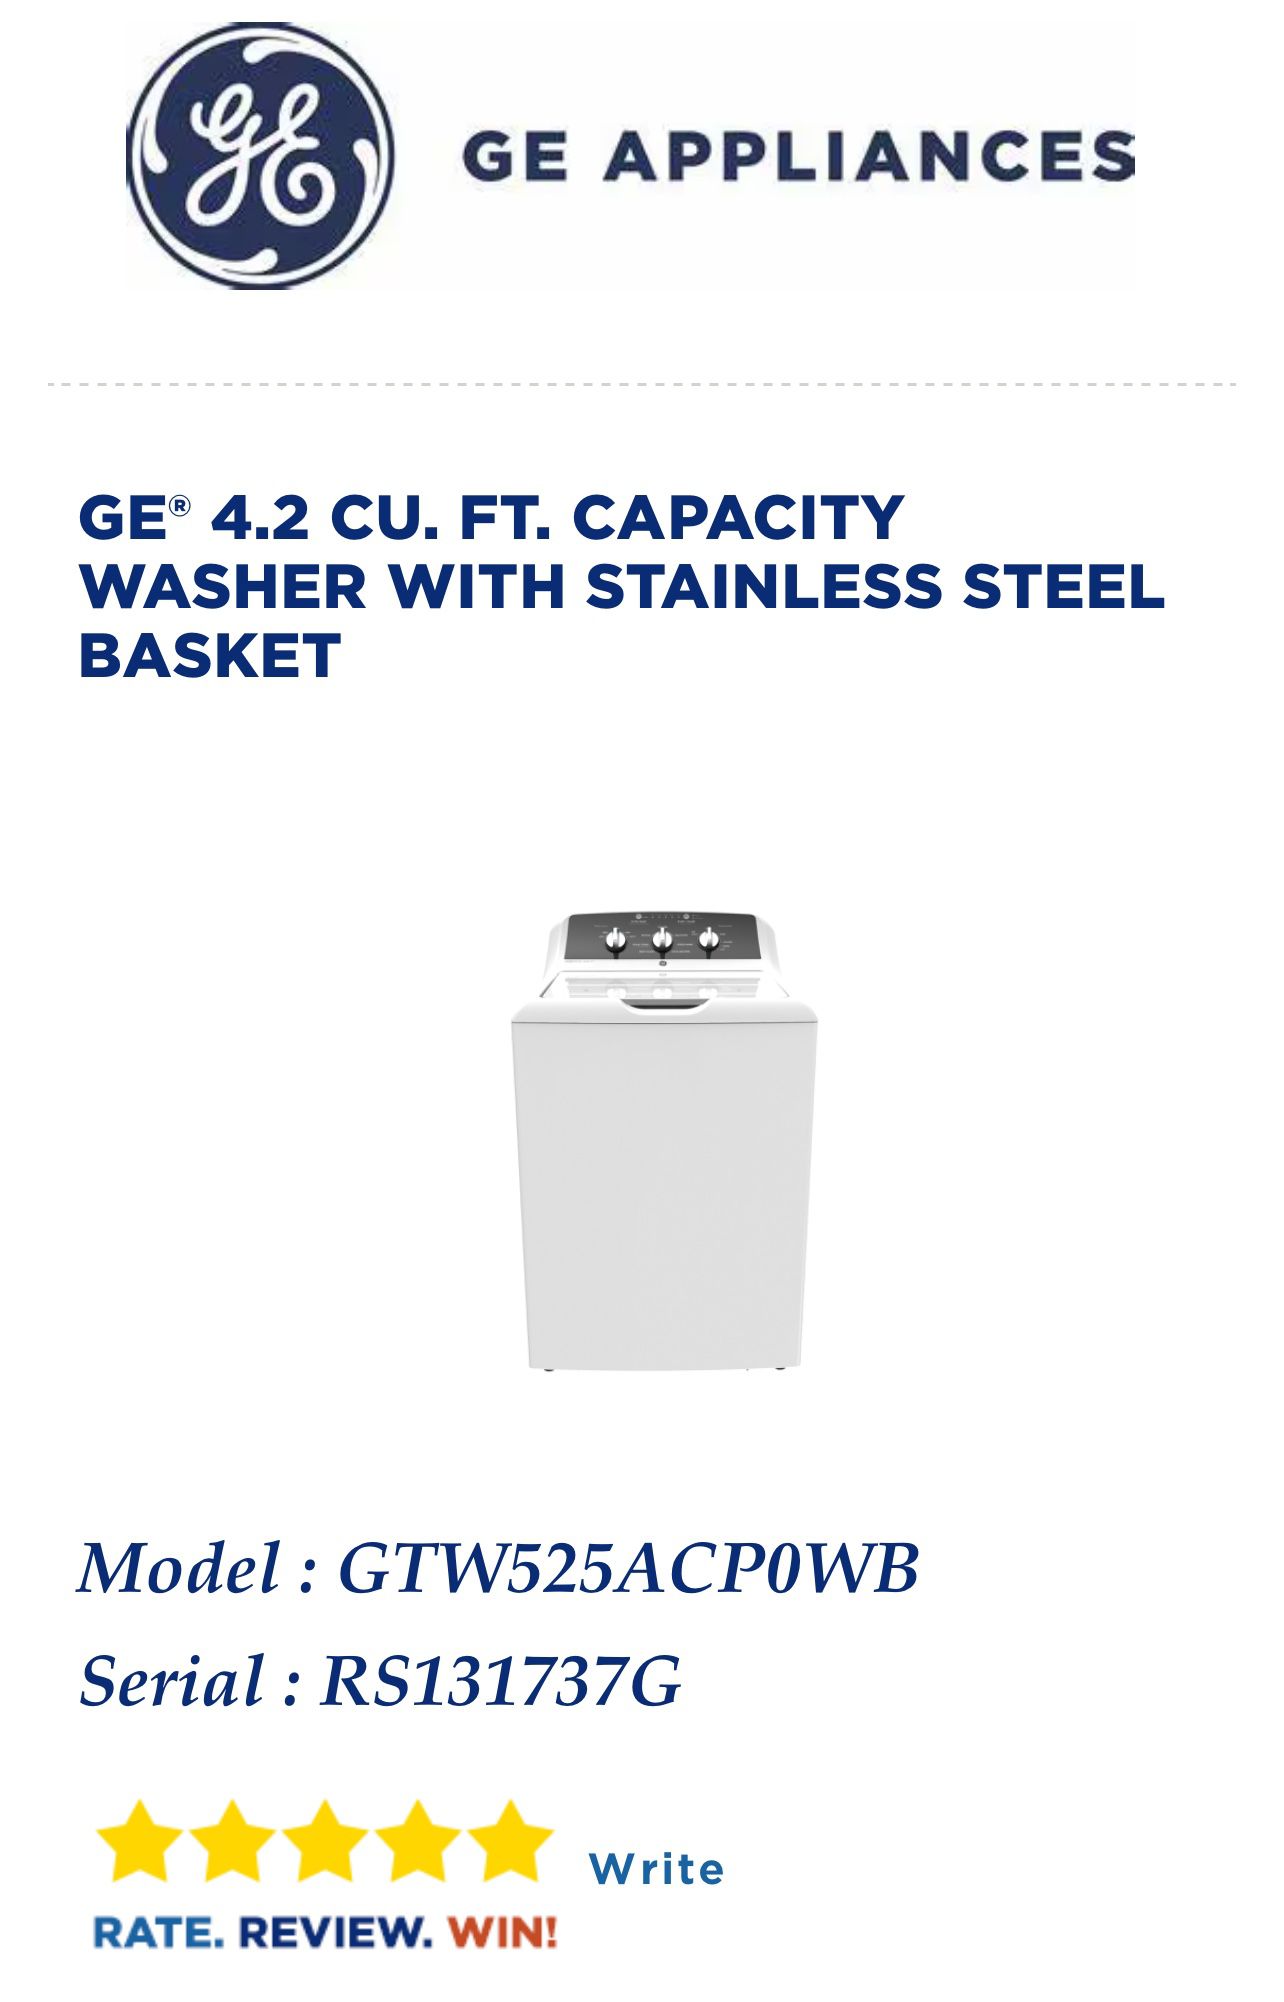 GE® 4.2 CU. FT. CAPACITY WASHER WITH STAINLESS STEEL BASKET